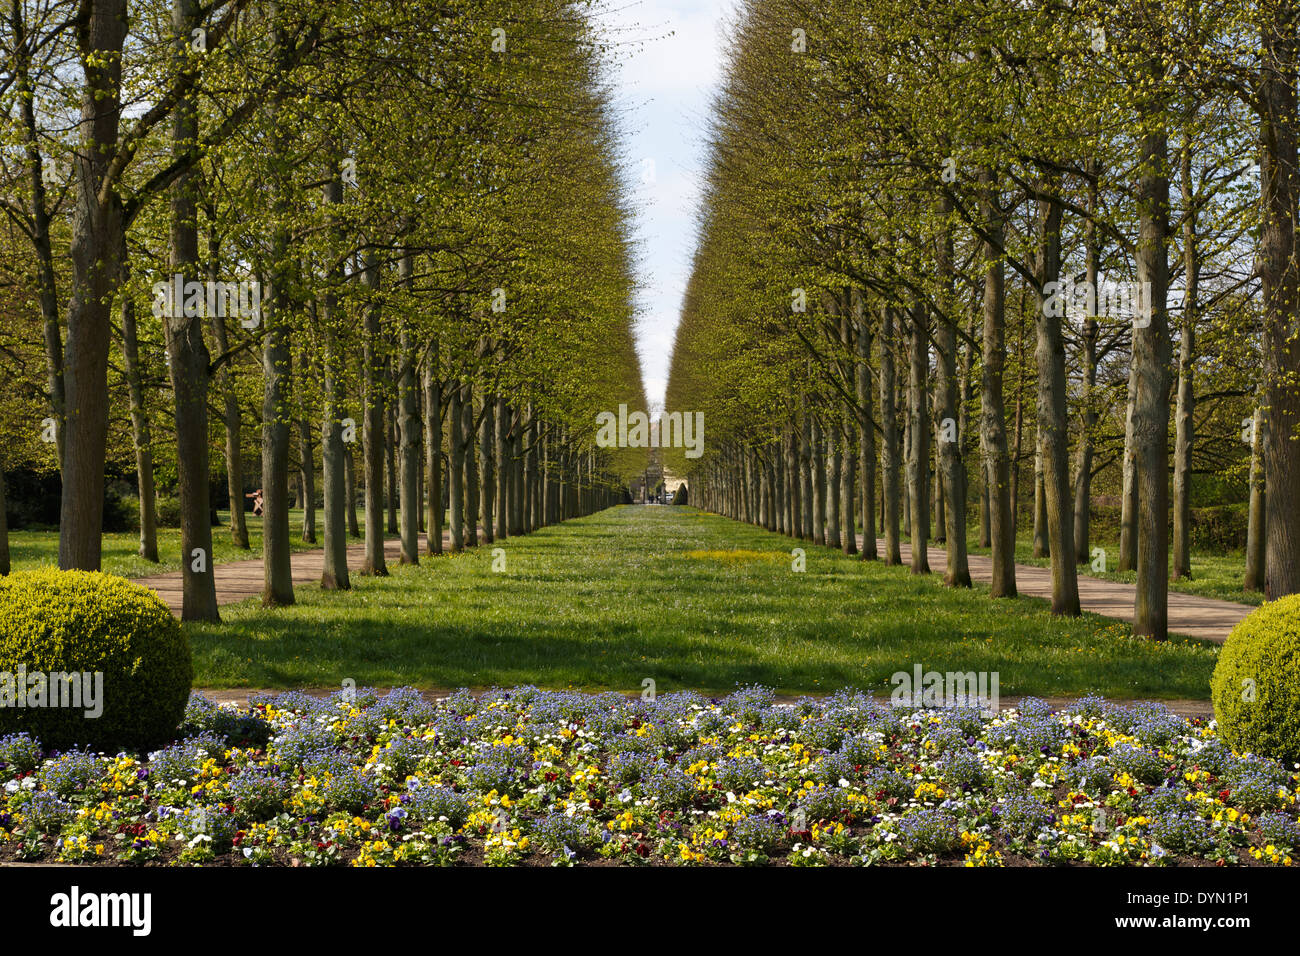 A photograph of an alley of linden trees in the French Garden (Französischer Garten) in Celle, Germany. Stock Photo